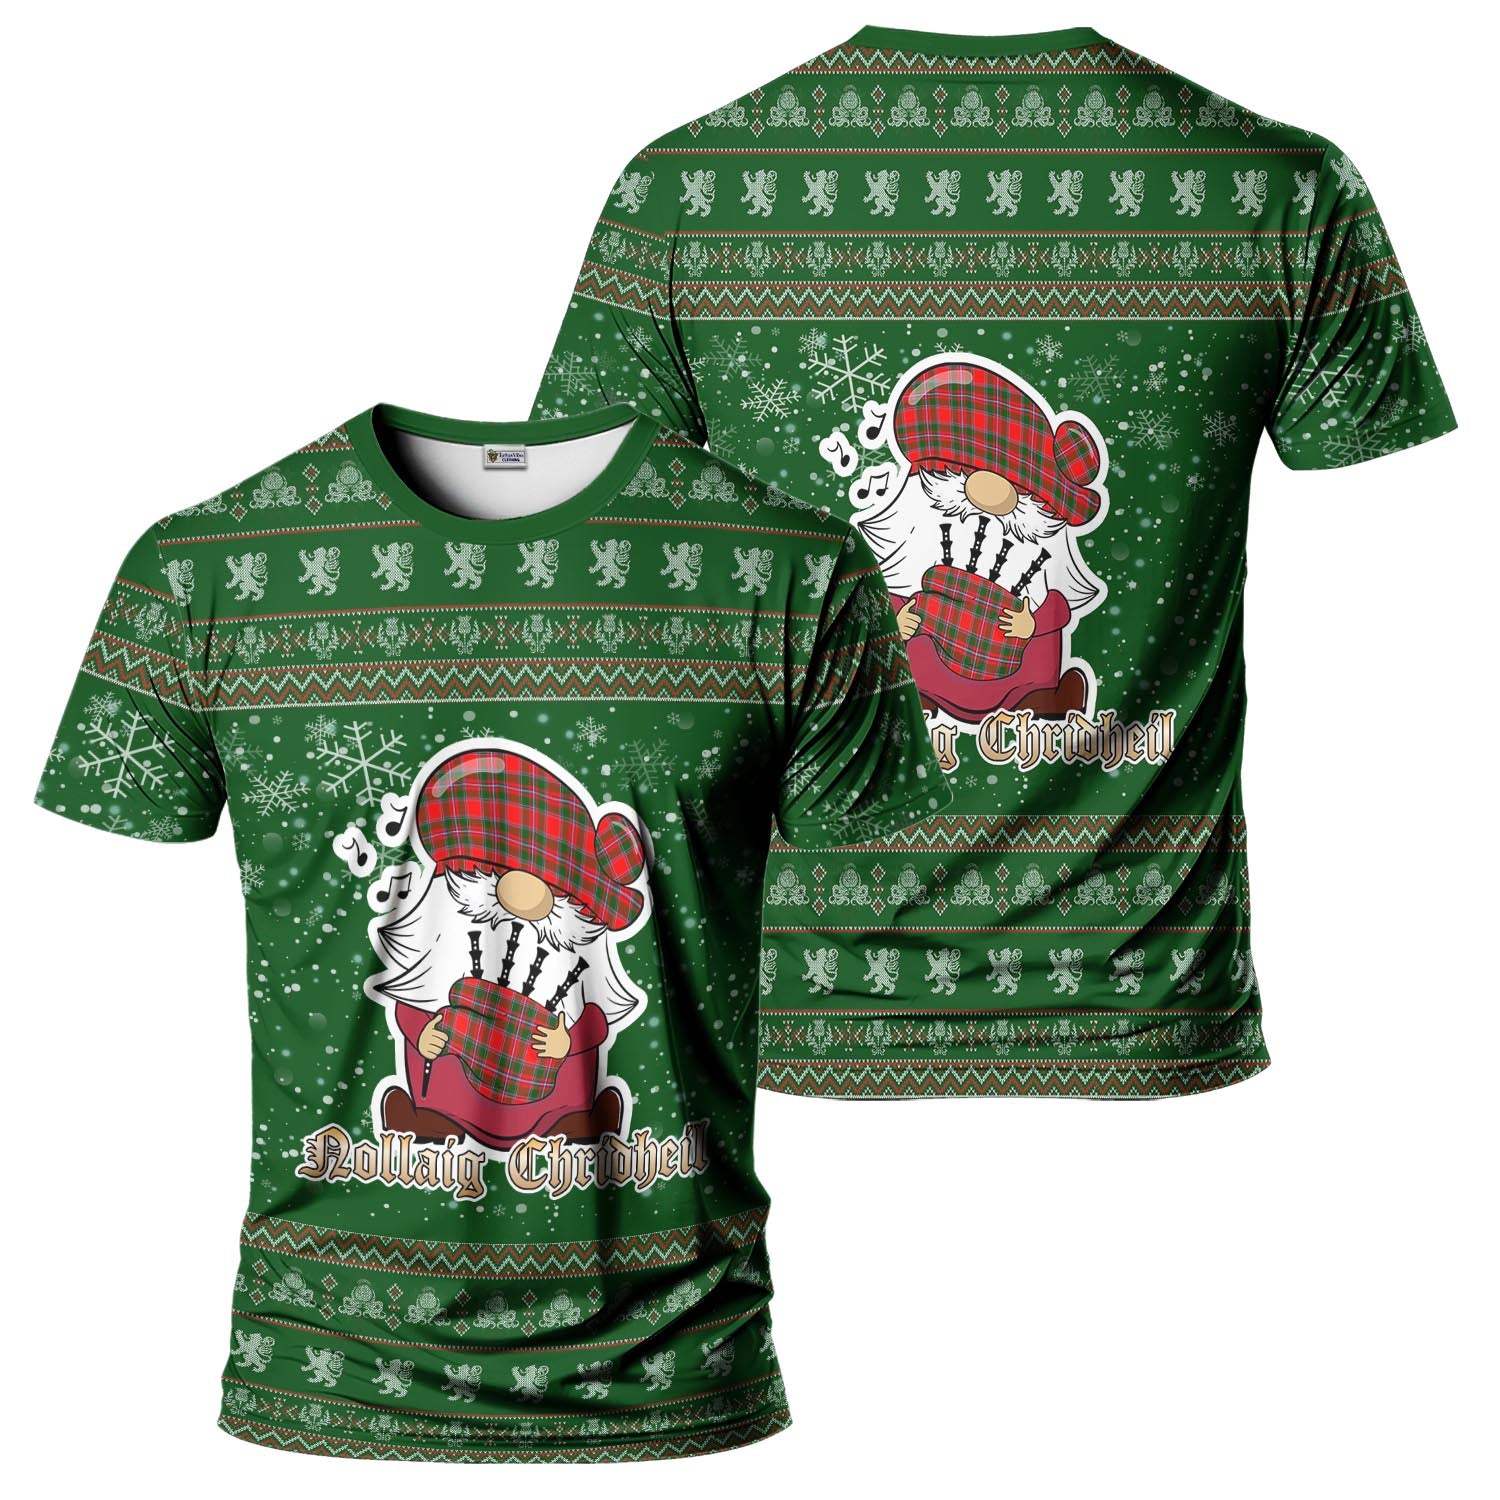 Spens Modern Clan Christmas Family T-Shirt with Funny Gnome Playing Bagpipes Men's Shirt Green - Tartanvibesclothing